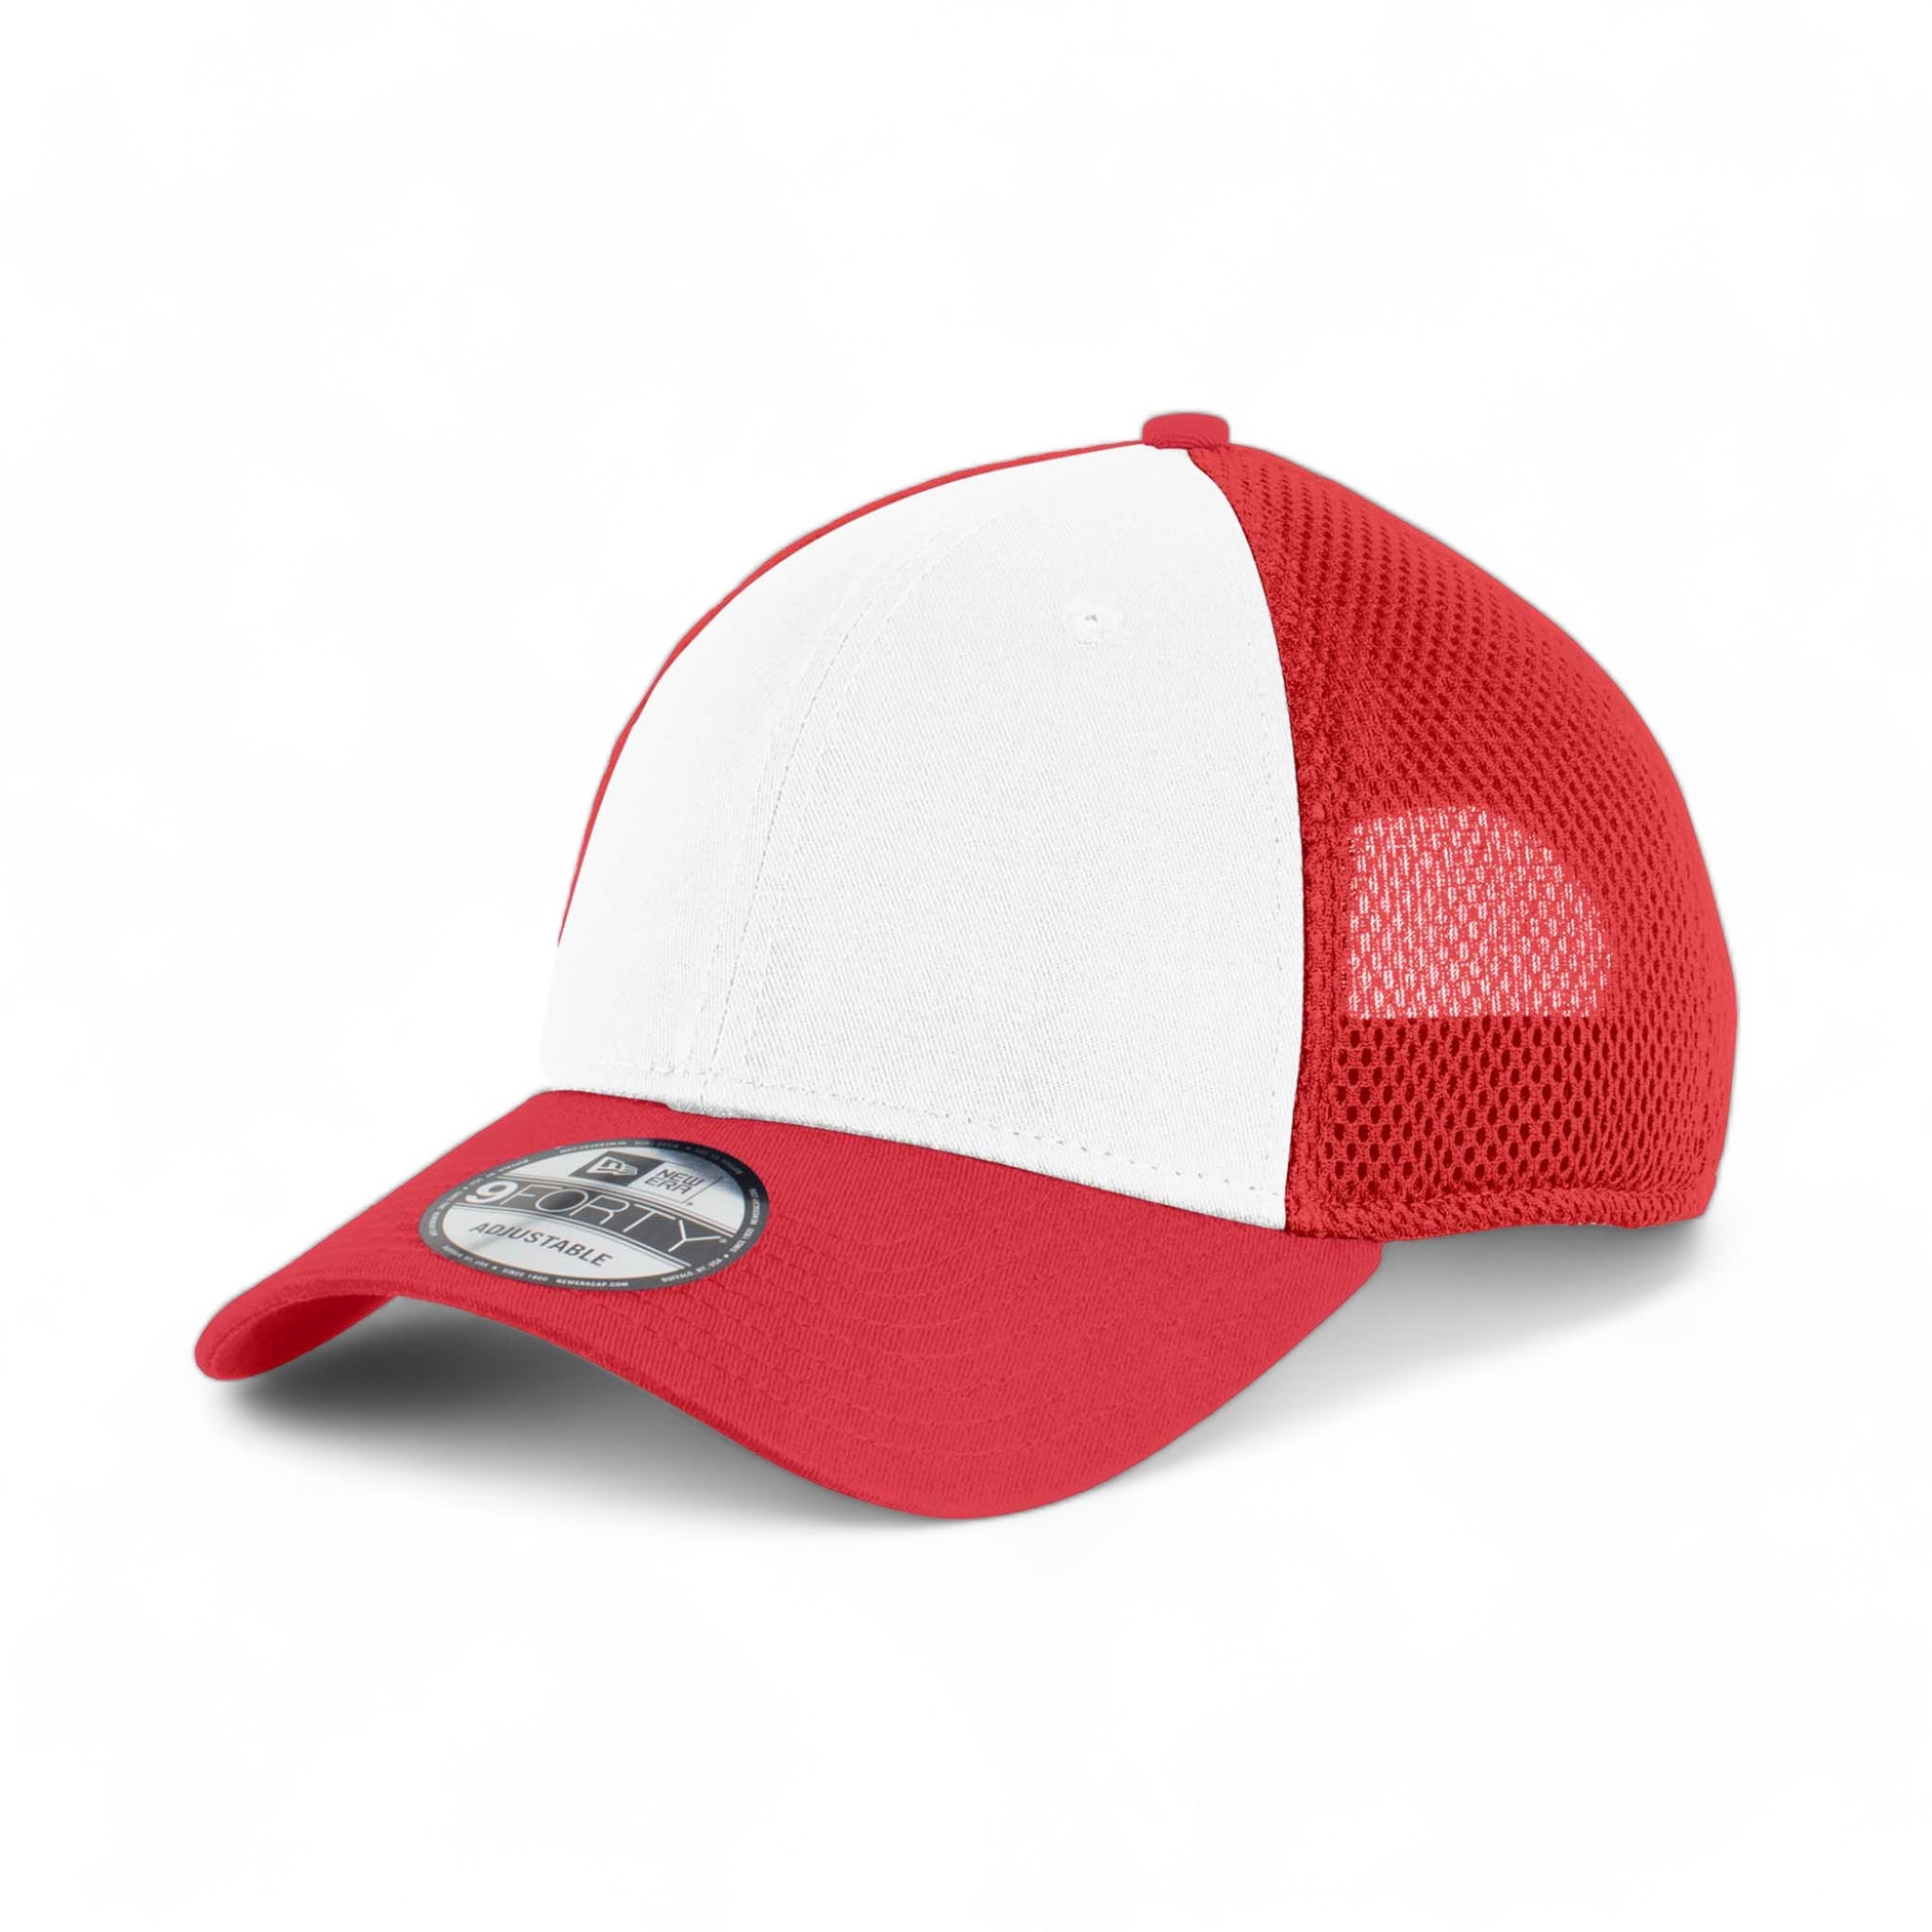 Side view of New Era NE204 custom hat in white and scarlet red